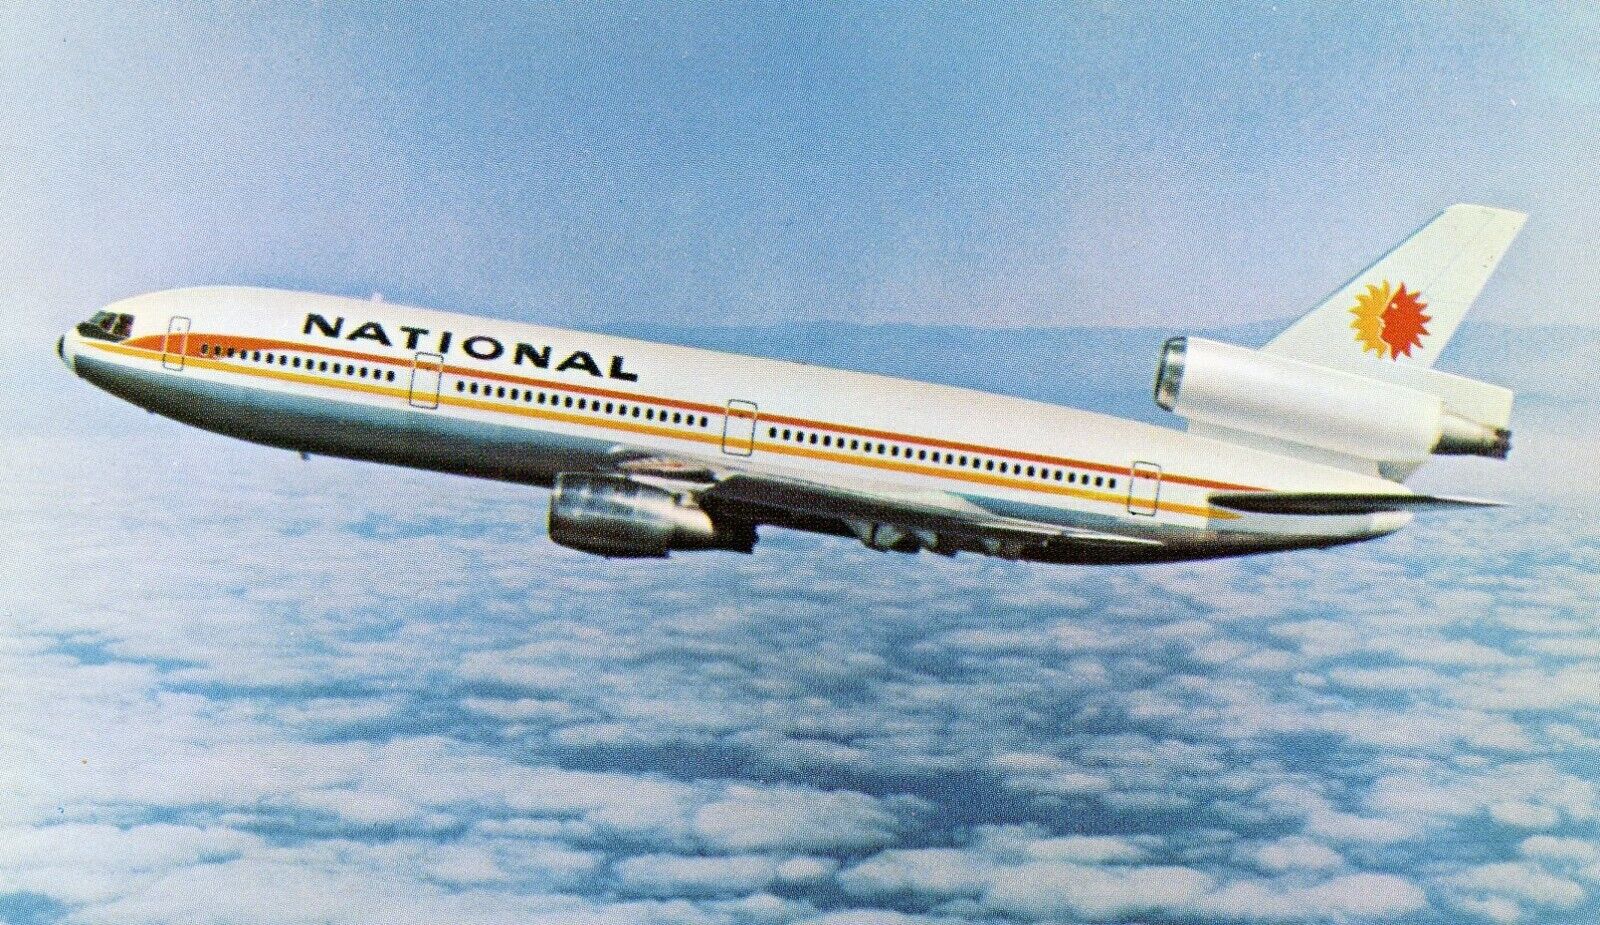 NATIONAL AIRLINES  DC-10   AIRLINE ISSUE  POSTCARD  PAN AM / PAN AMERICAN